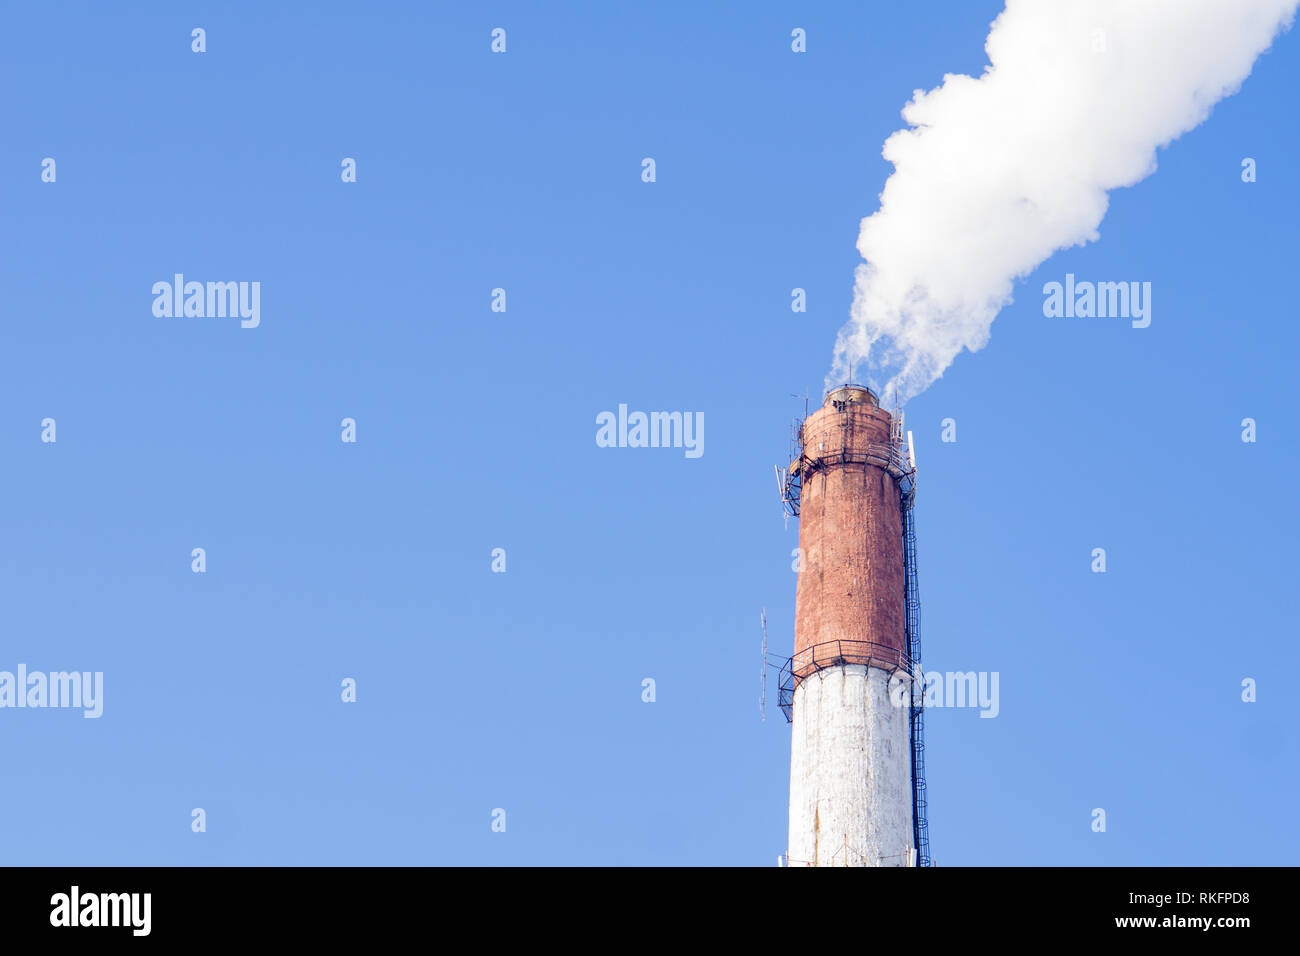 Smoke from industrial chimneys against the blue sky. Pollution. Stock Photo